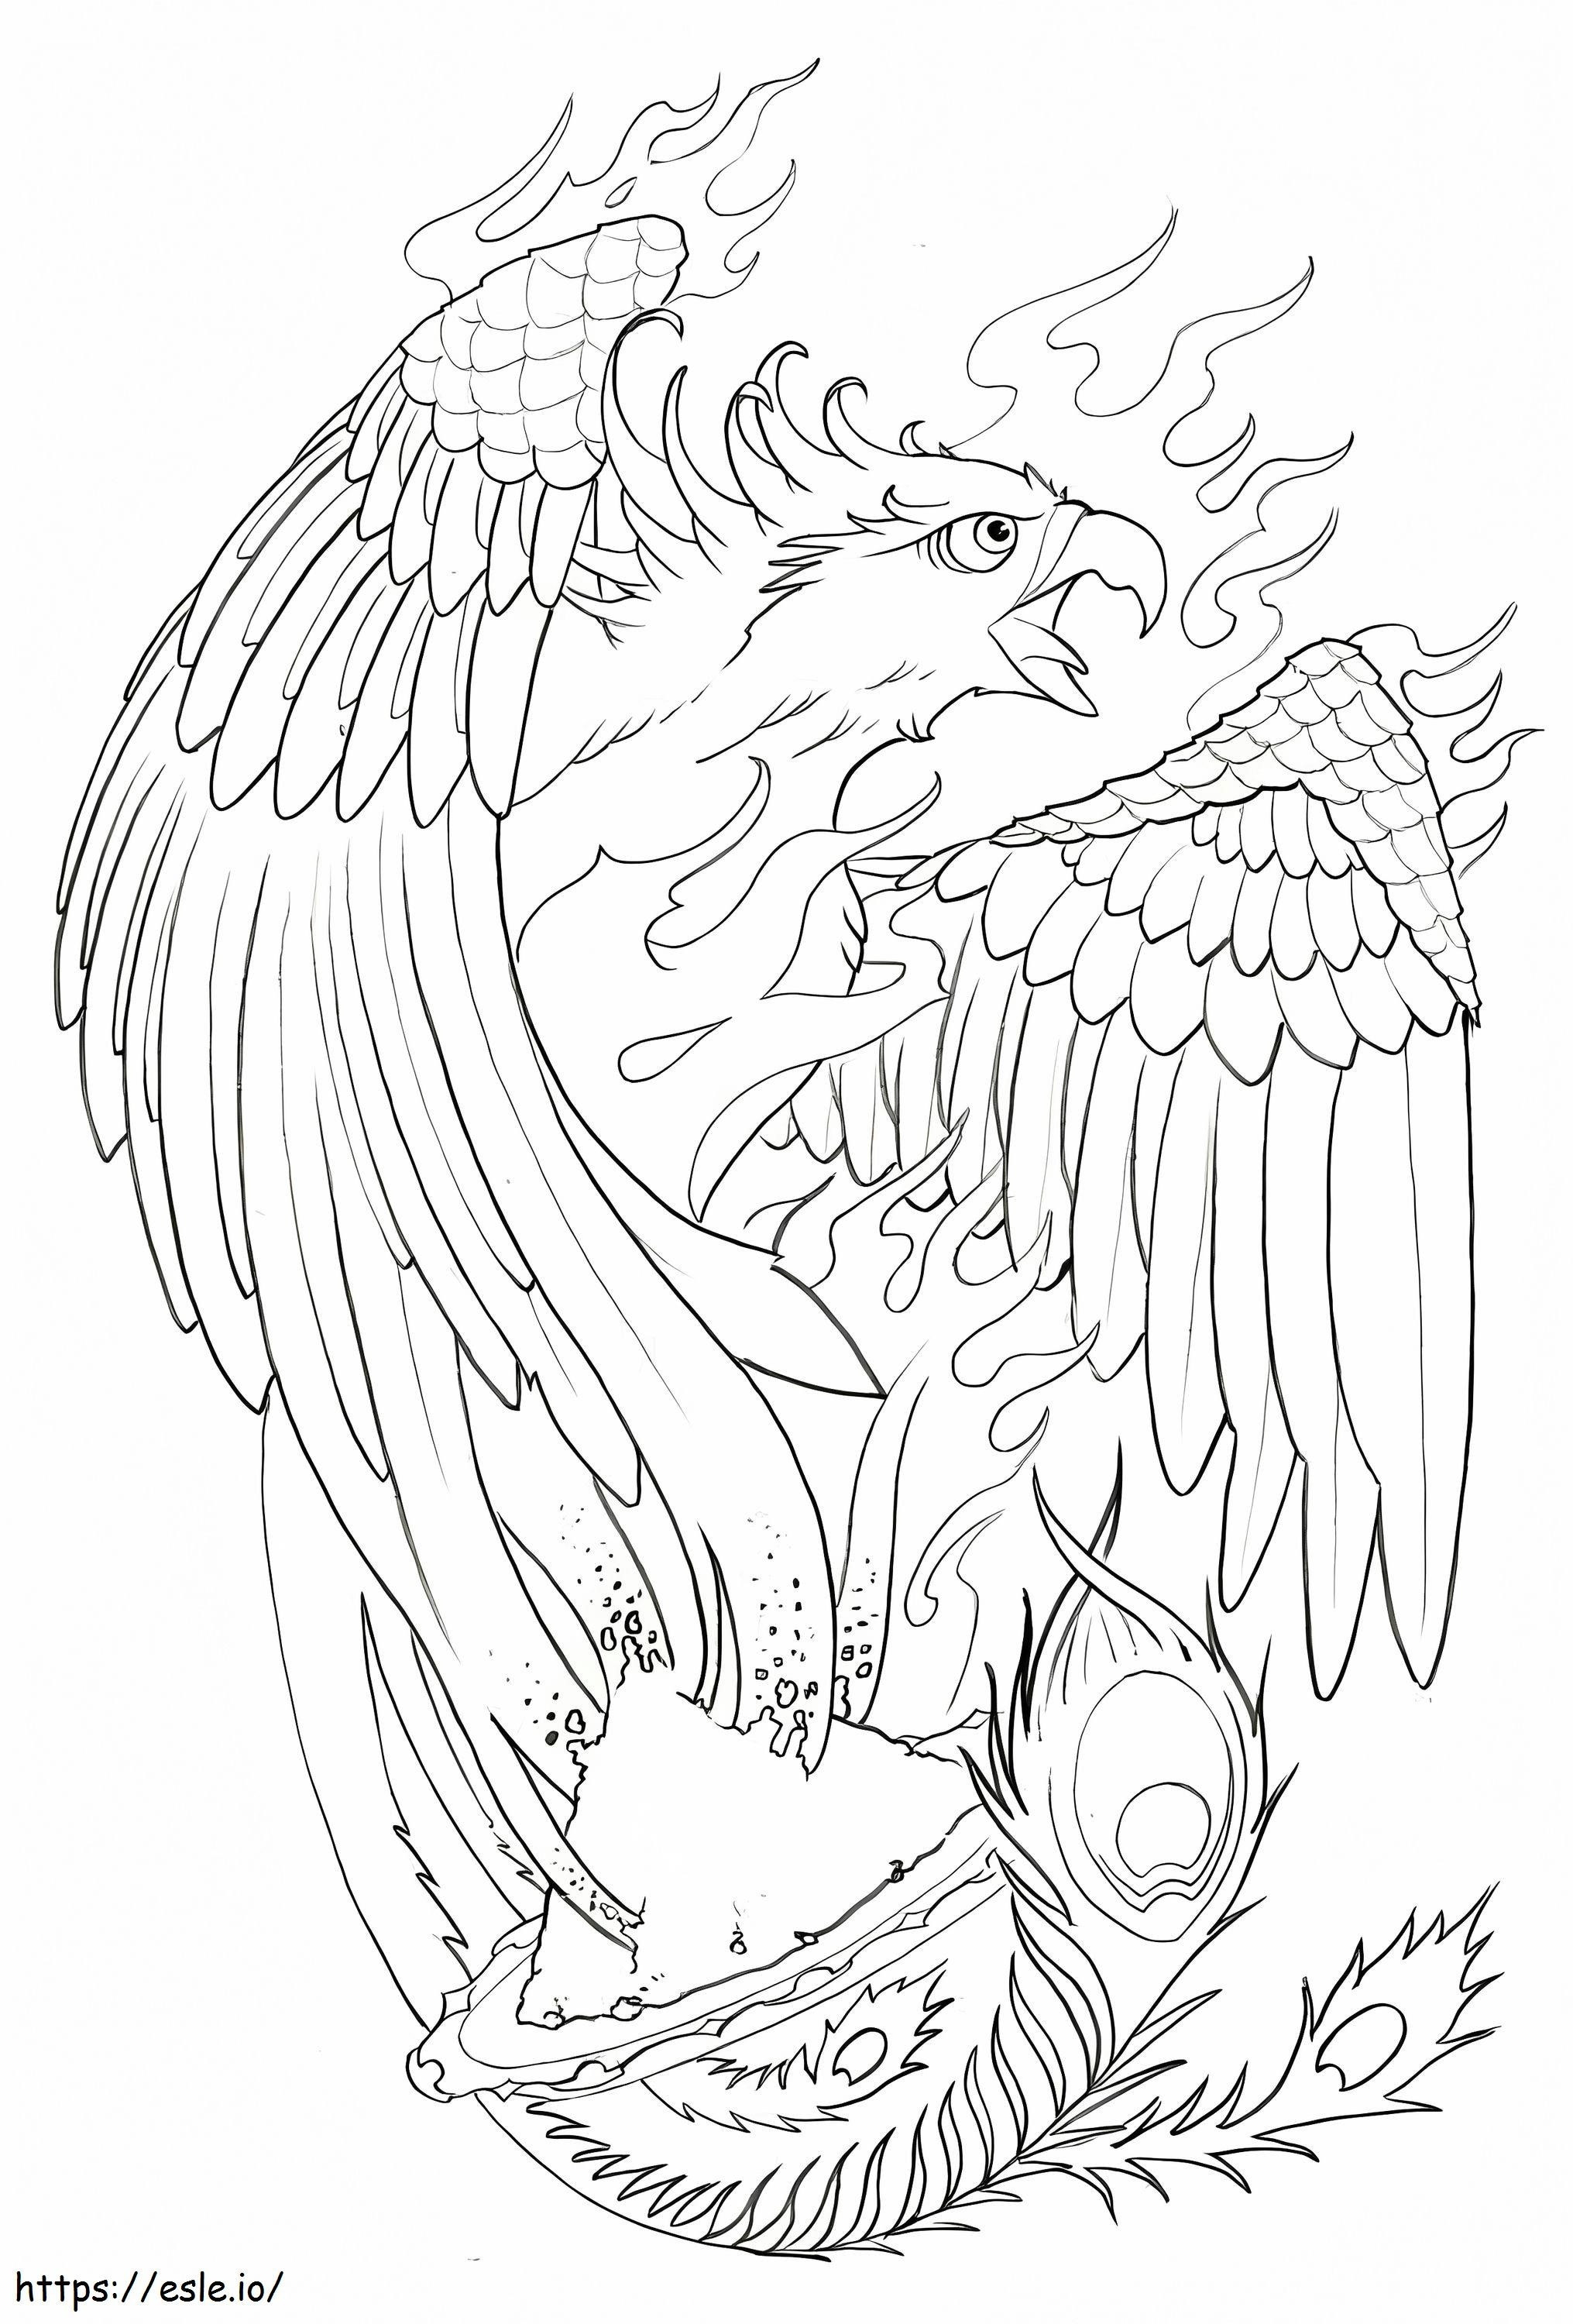 Awesome Phoenix coloring page